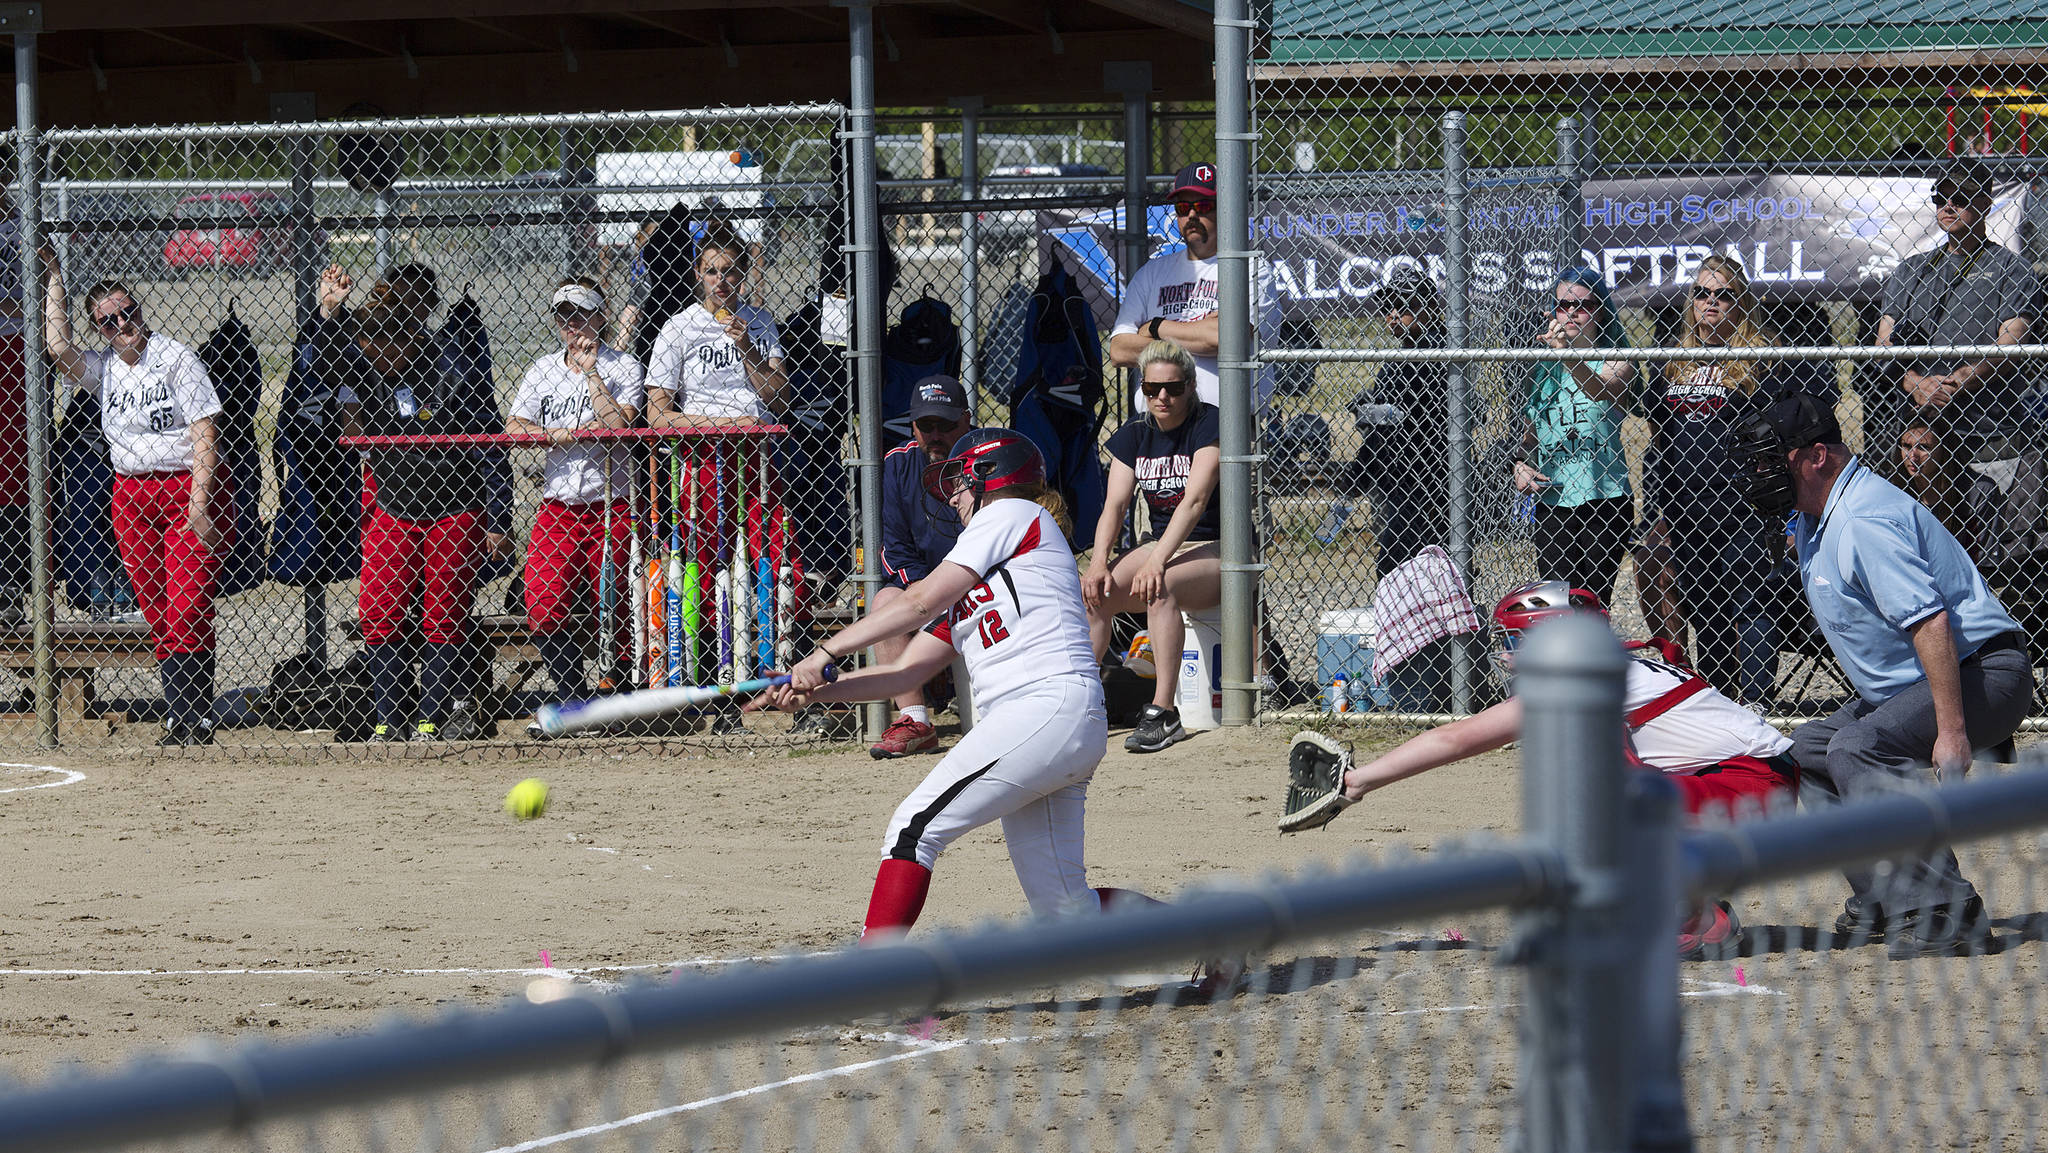 Morgan Balovich hits the ball to centerfield against North Pole, Friday, June 2, at the ASAA/First National Bank Alaska State Softball Championships in Fairbanks. (Sarah Manriquez | For the Juneau Empire)